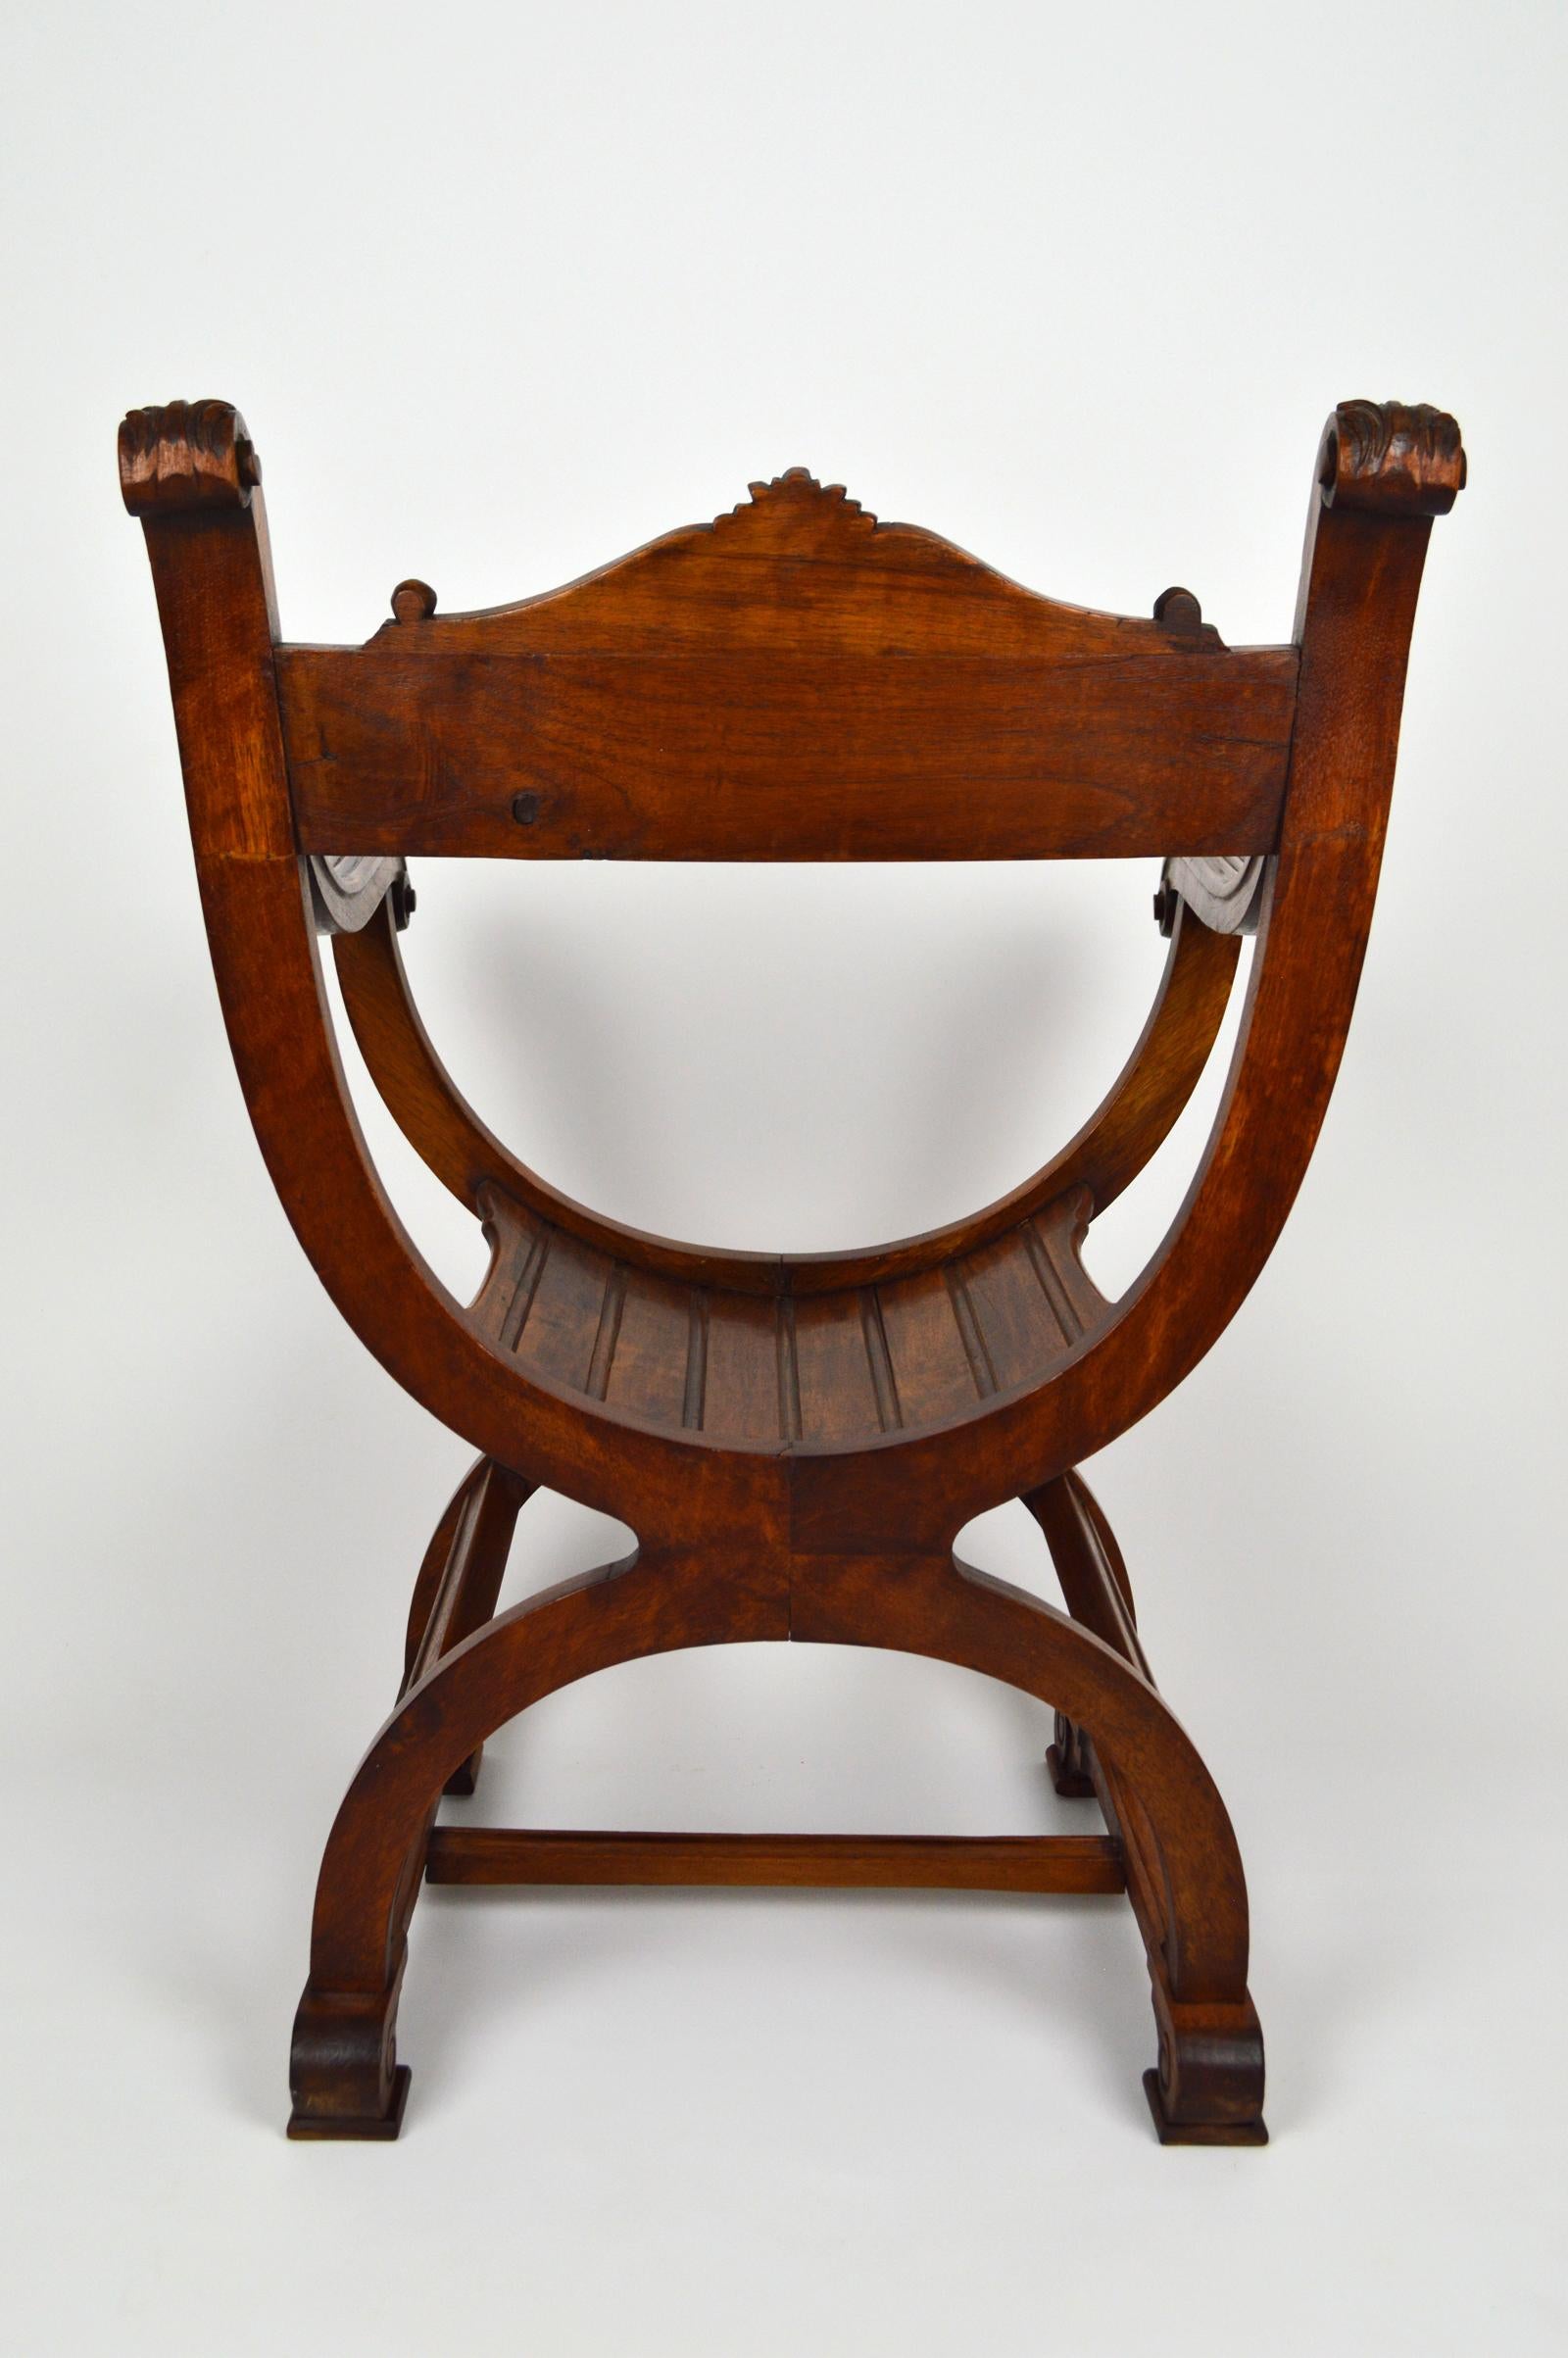 French Carved Walnut Curule or Armchair, Renaissance Revival, circa 1880 For Sale 11